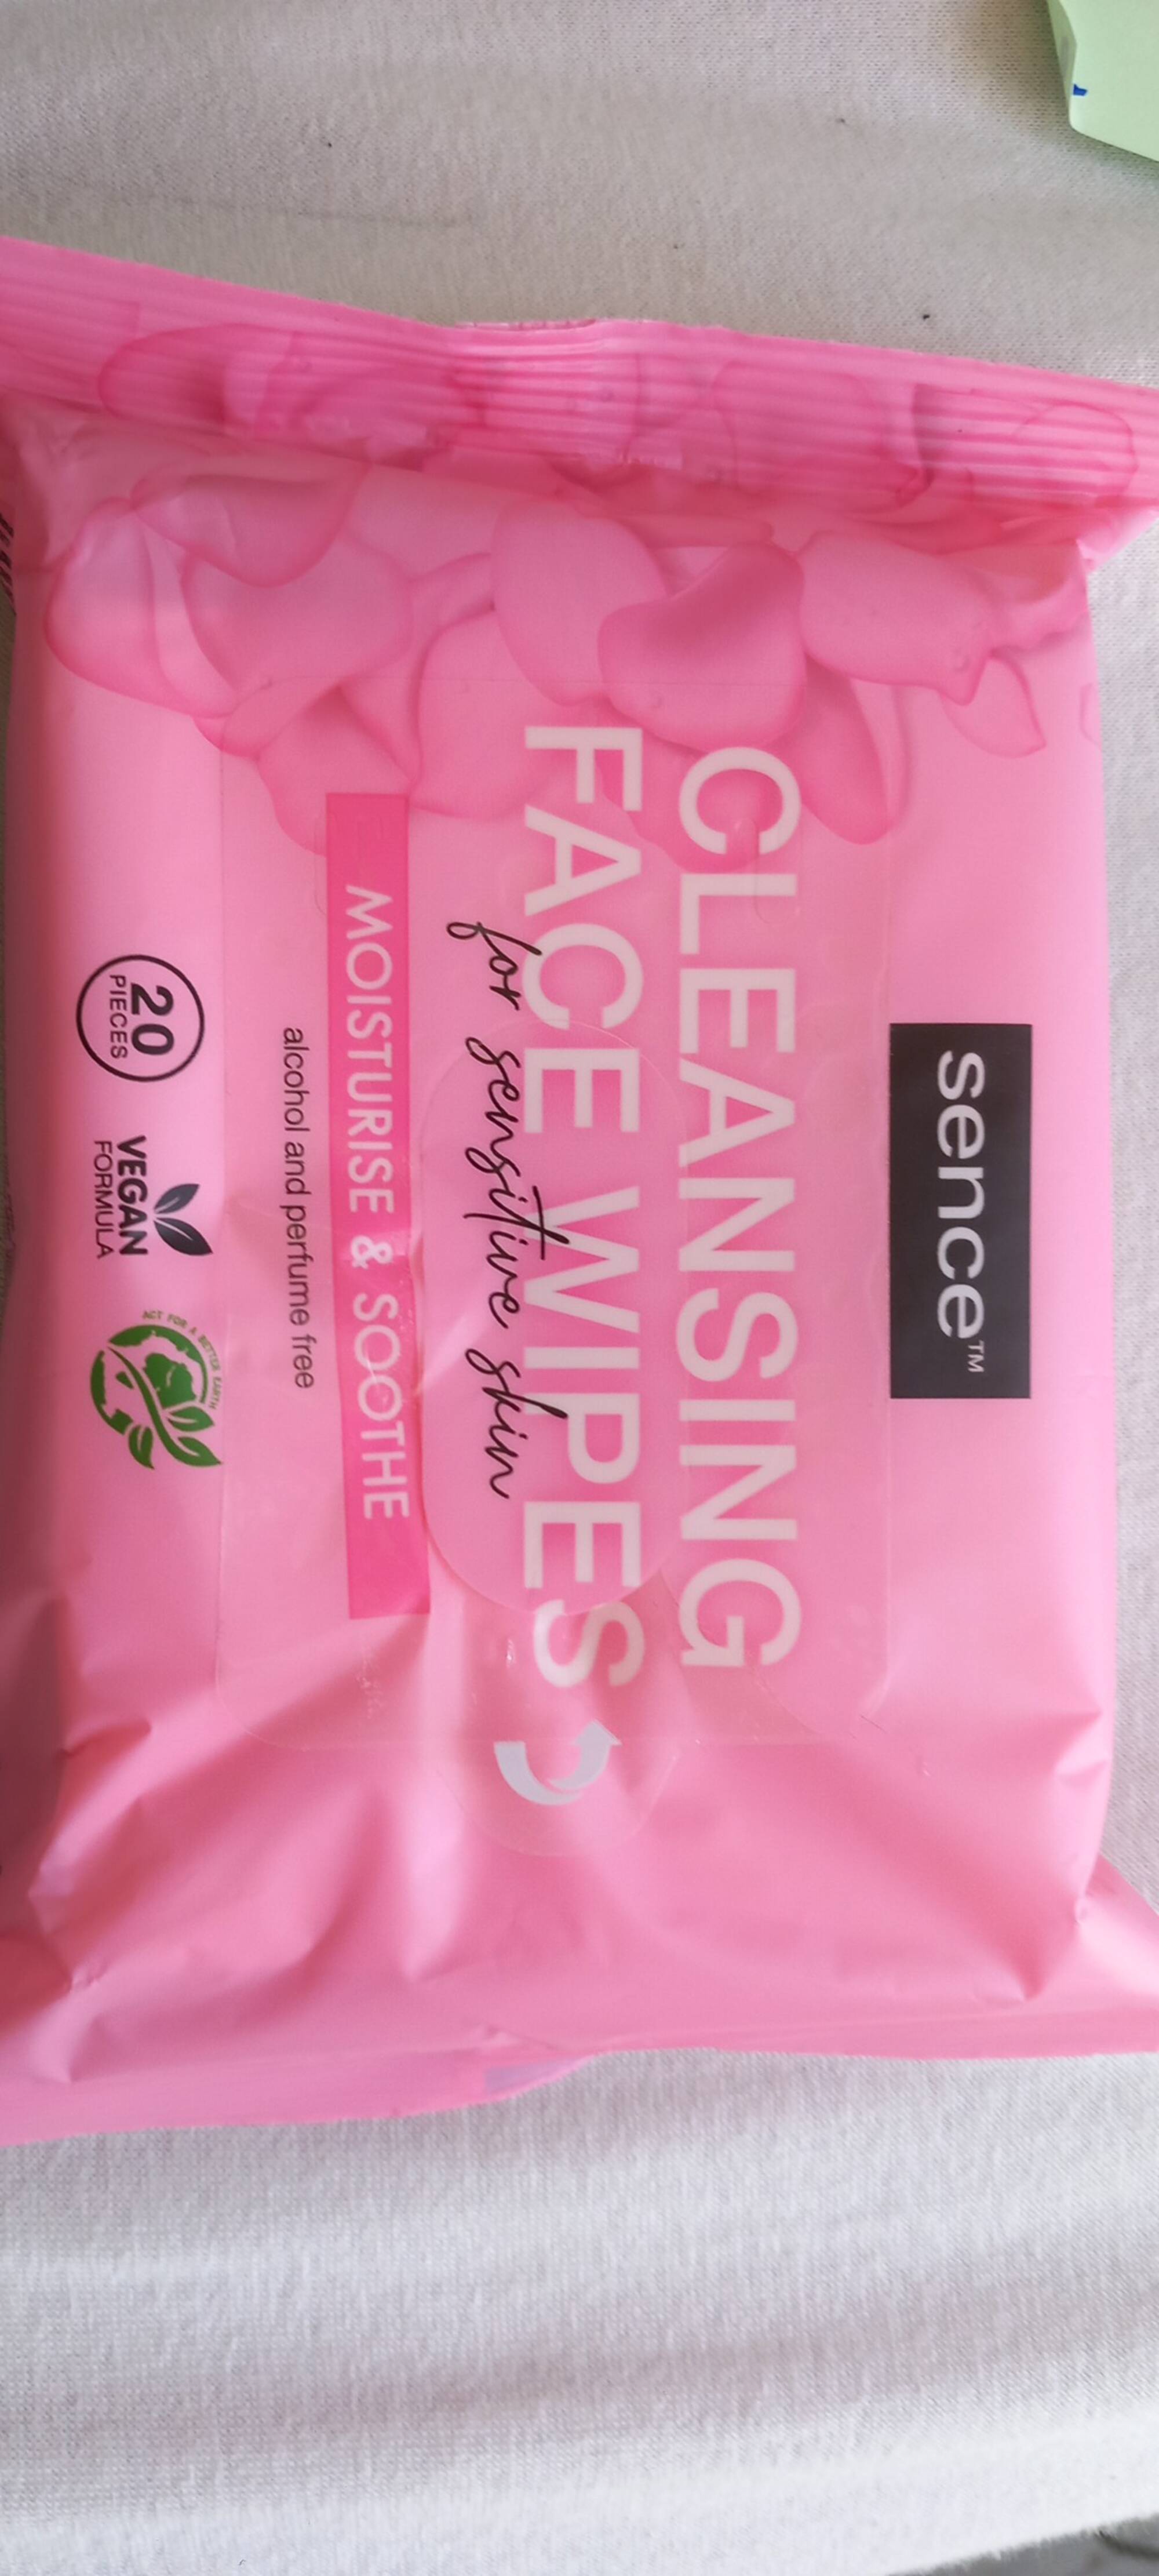 SENCE - Cleansing face wipes